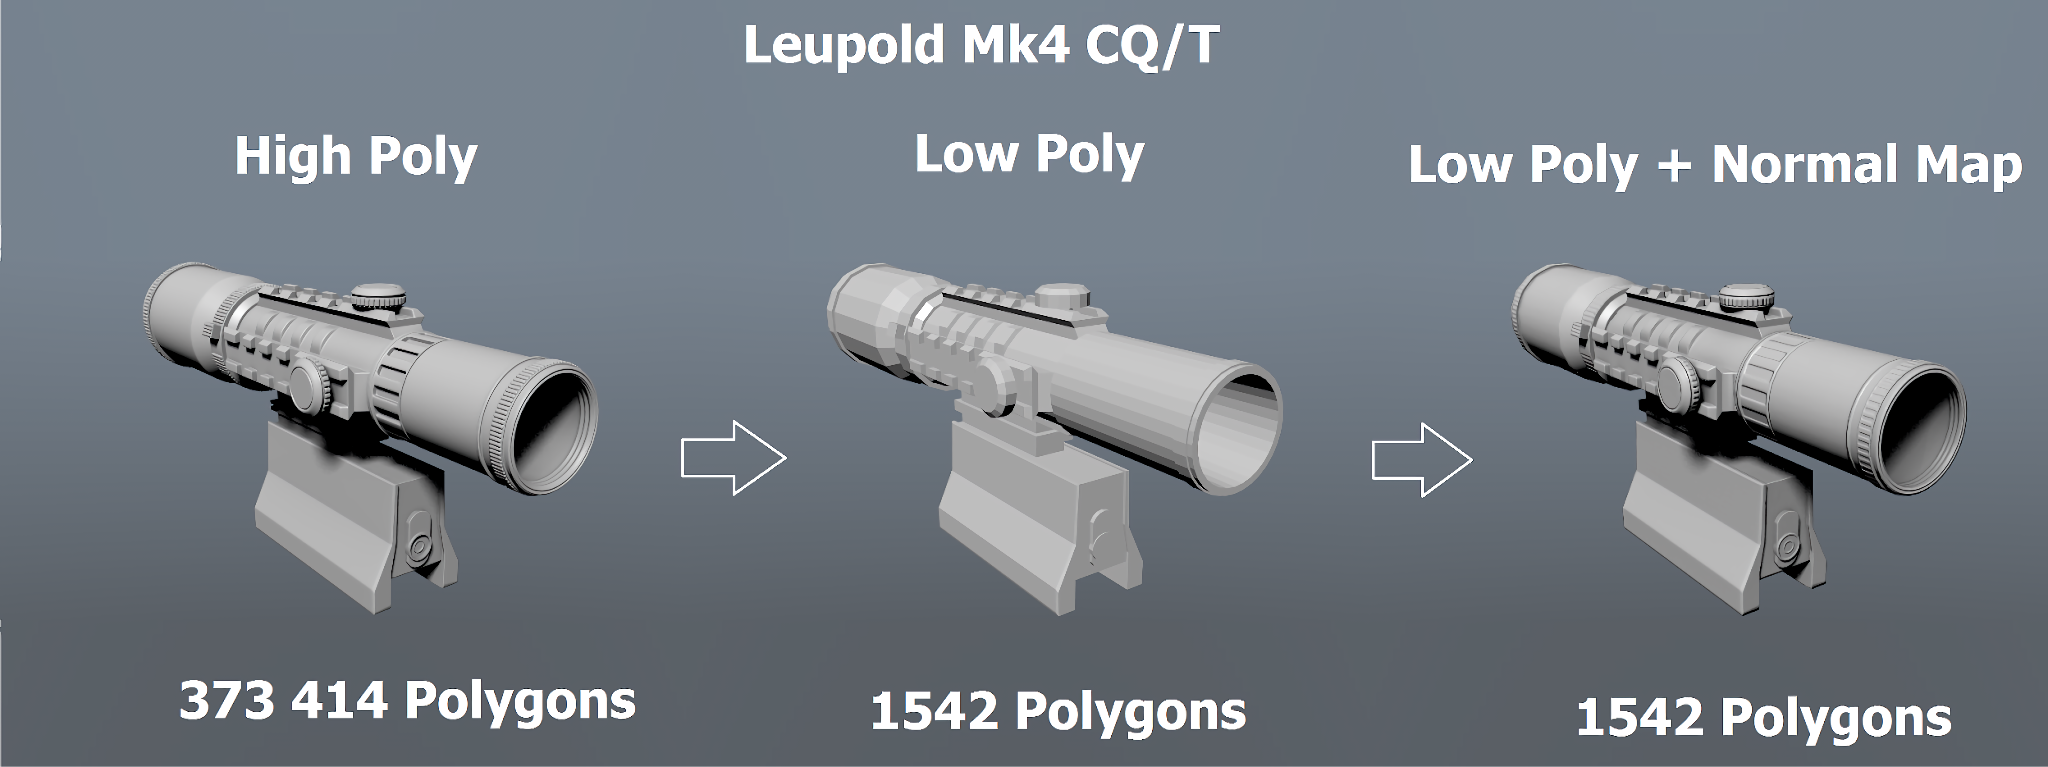 Adding Normal Map to a Leupold Mk4 CQ/T model